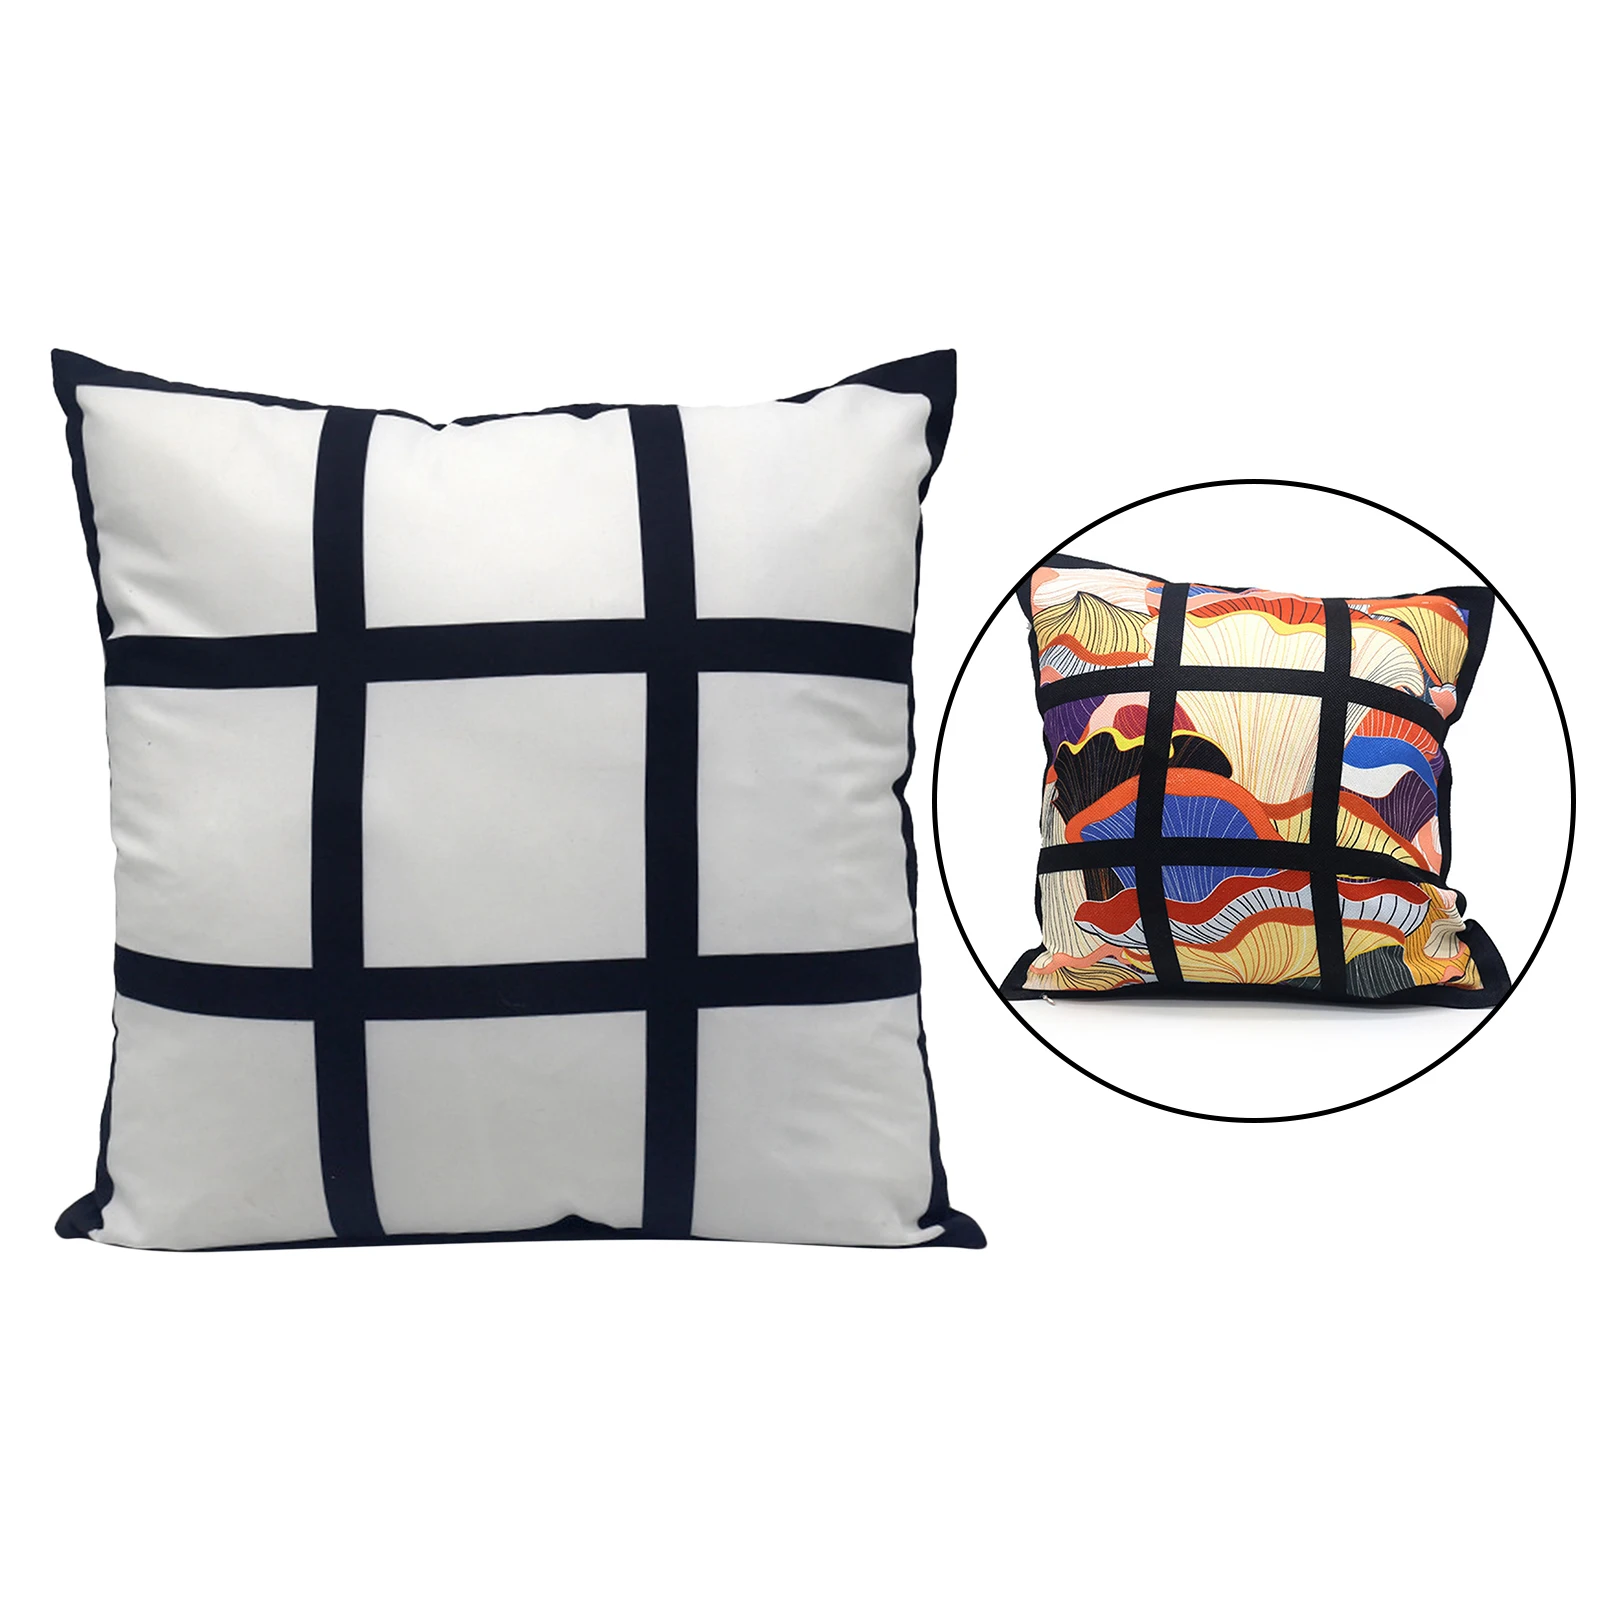 Sublimation Sequin Pillow Blanks  Cover Cushions Sublimation - Pillow  Covers 40x40cm - Aliexpress